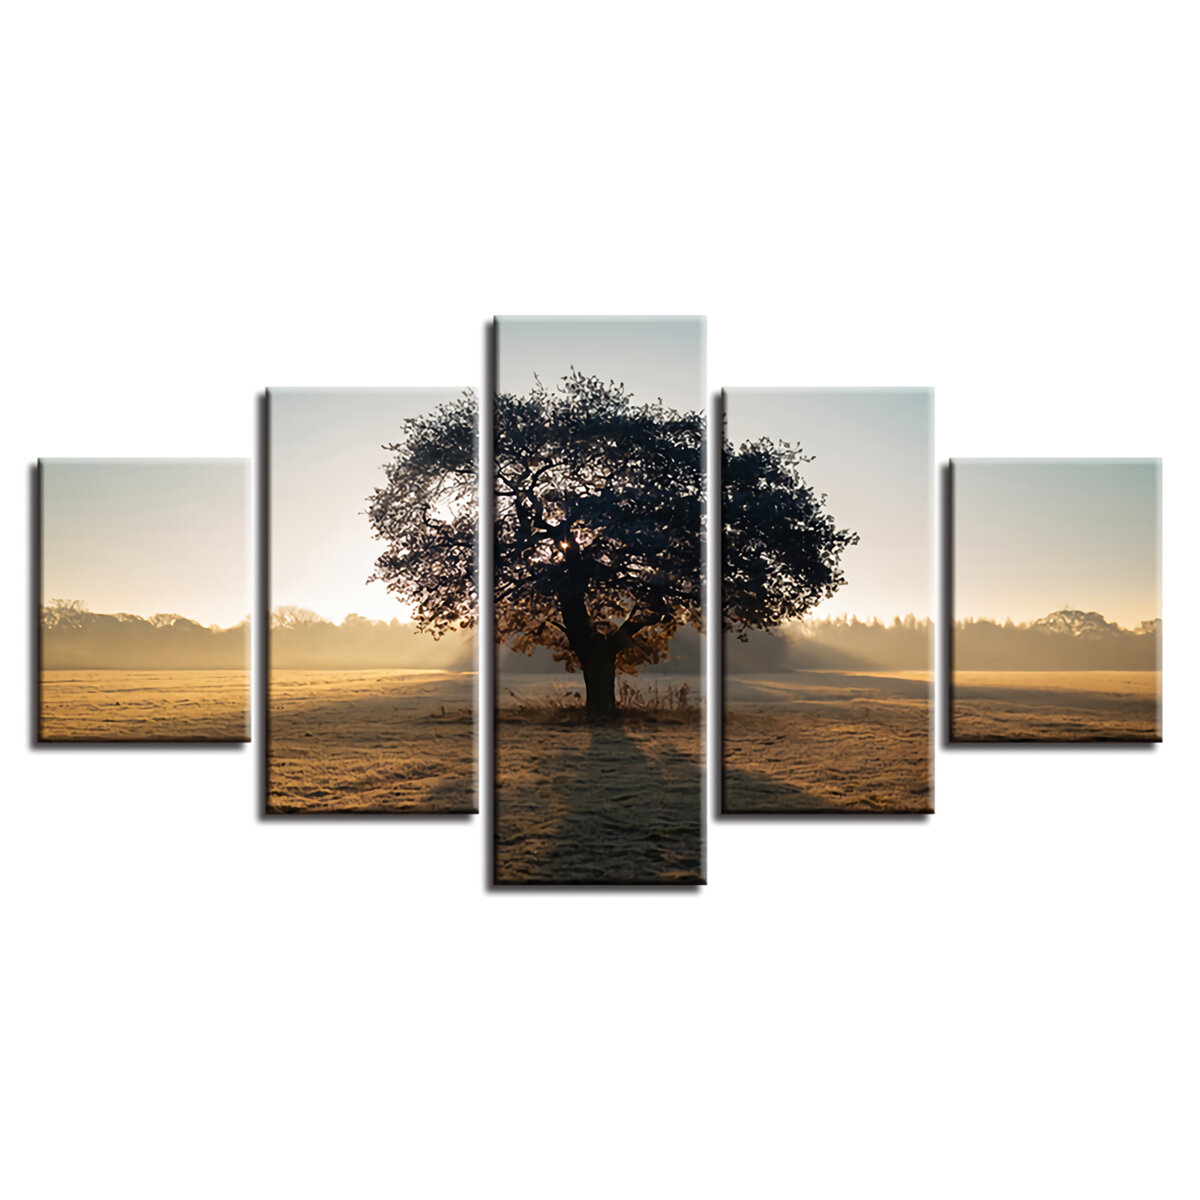 

5Pcs Wall Decorative Paintings Sunshine Tree Canvas Print Art Pictures Frameless Wall Hanging Decorations for Home Offic